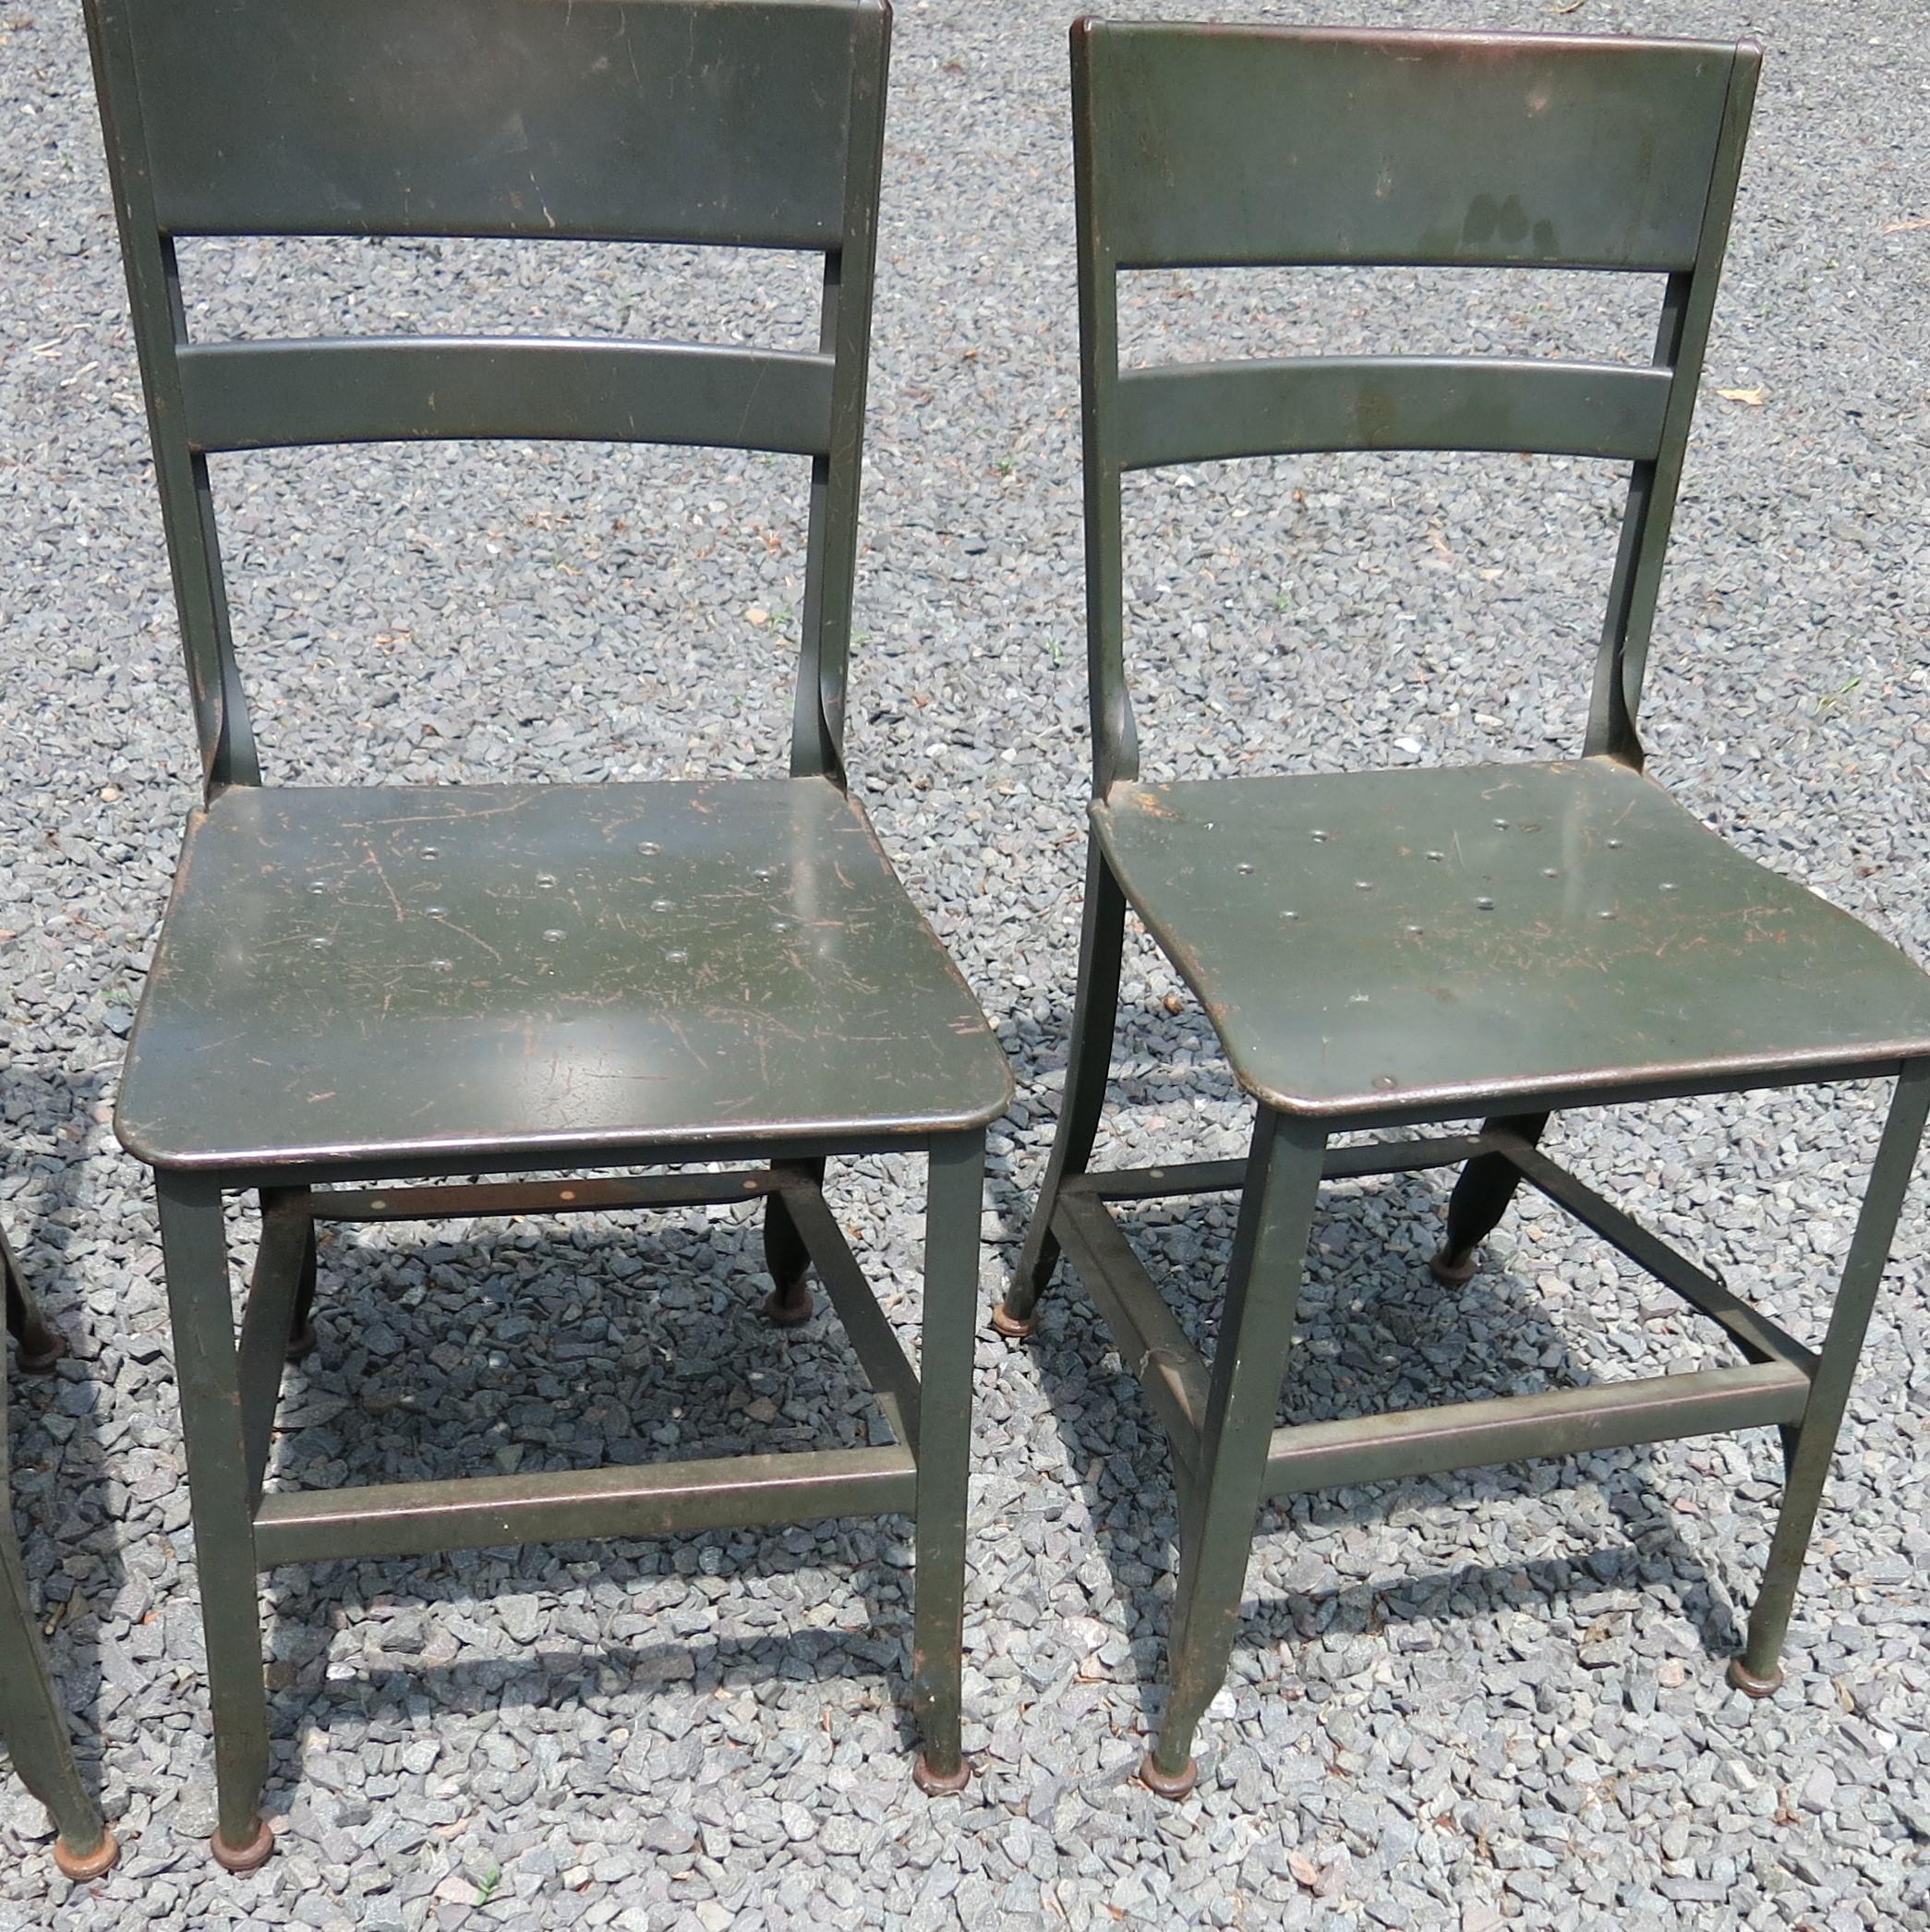 Four vintage metal Toledo chairs with distressed paint. There is paint loss and rust on the feet. They are 15.25